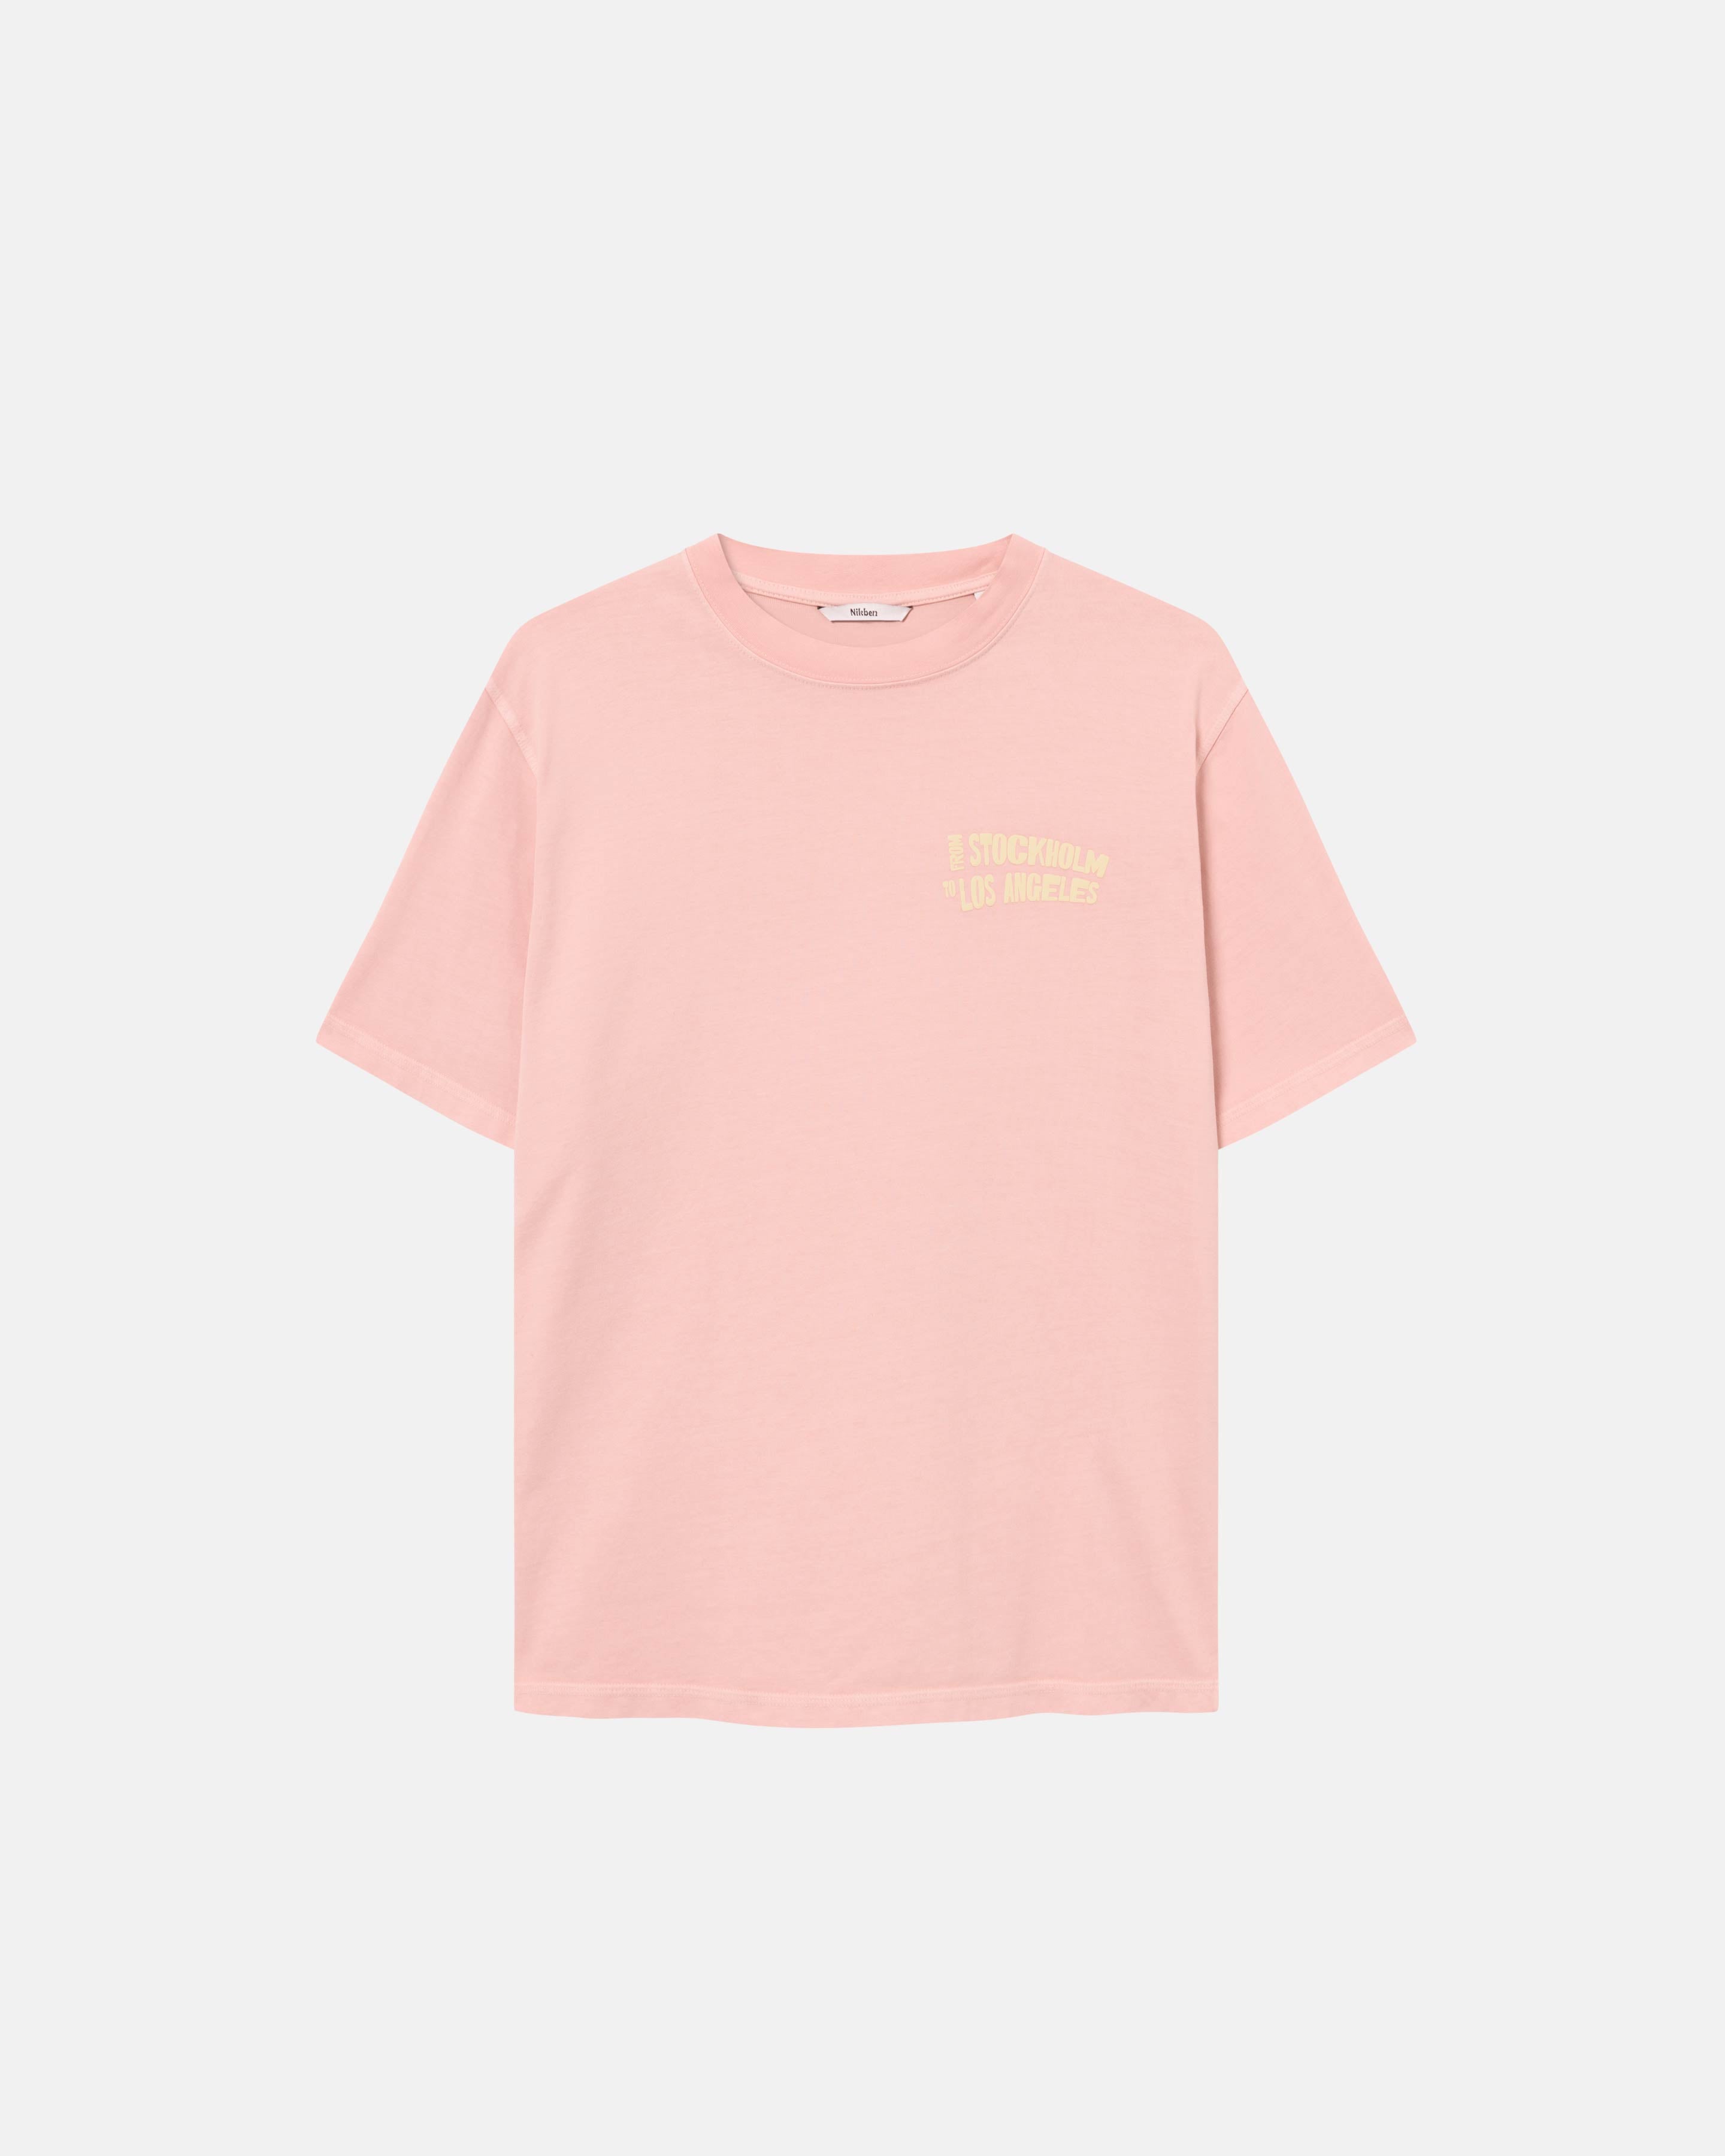 A salmon colored t-shirt with a yellow text print on its chest